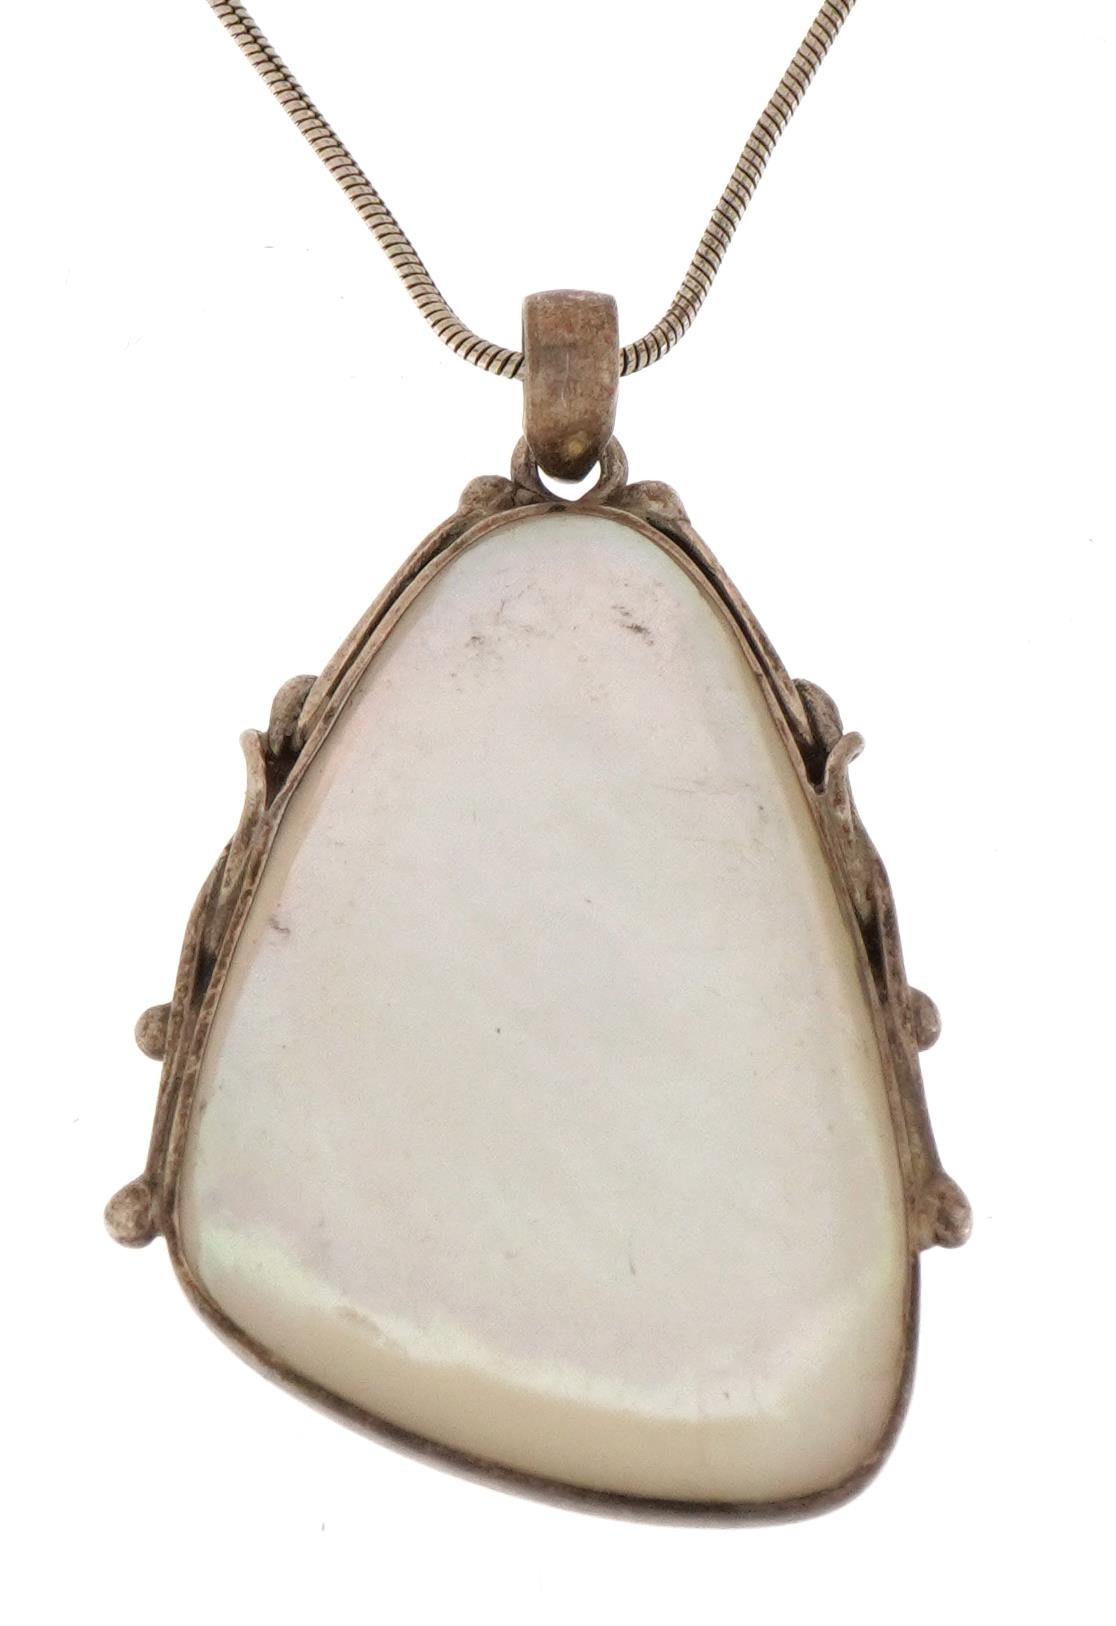 Stylish silver shell pendant on chain, stamped 925, 25cm in length, 21.4g